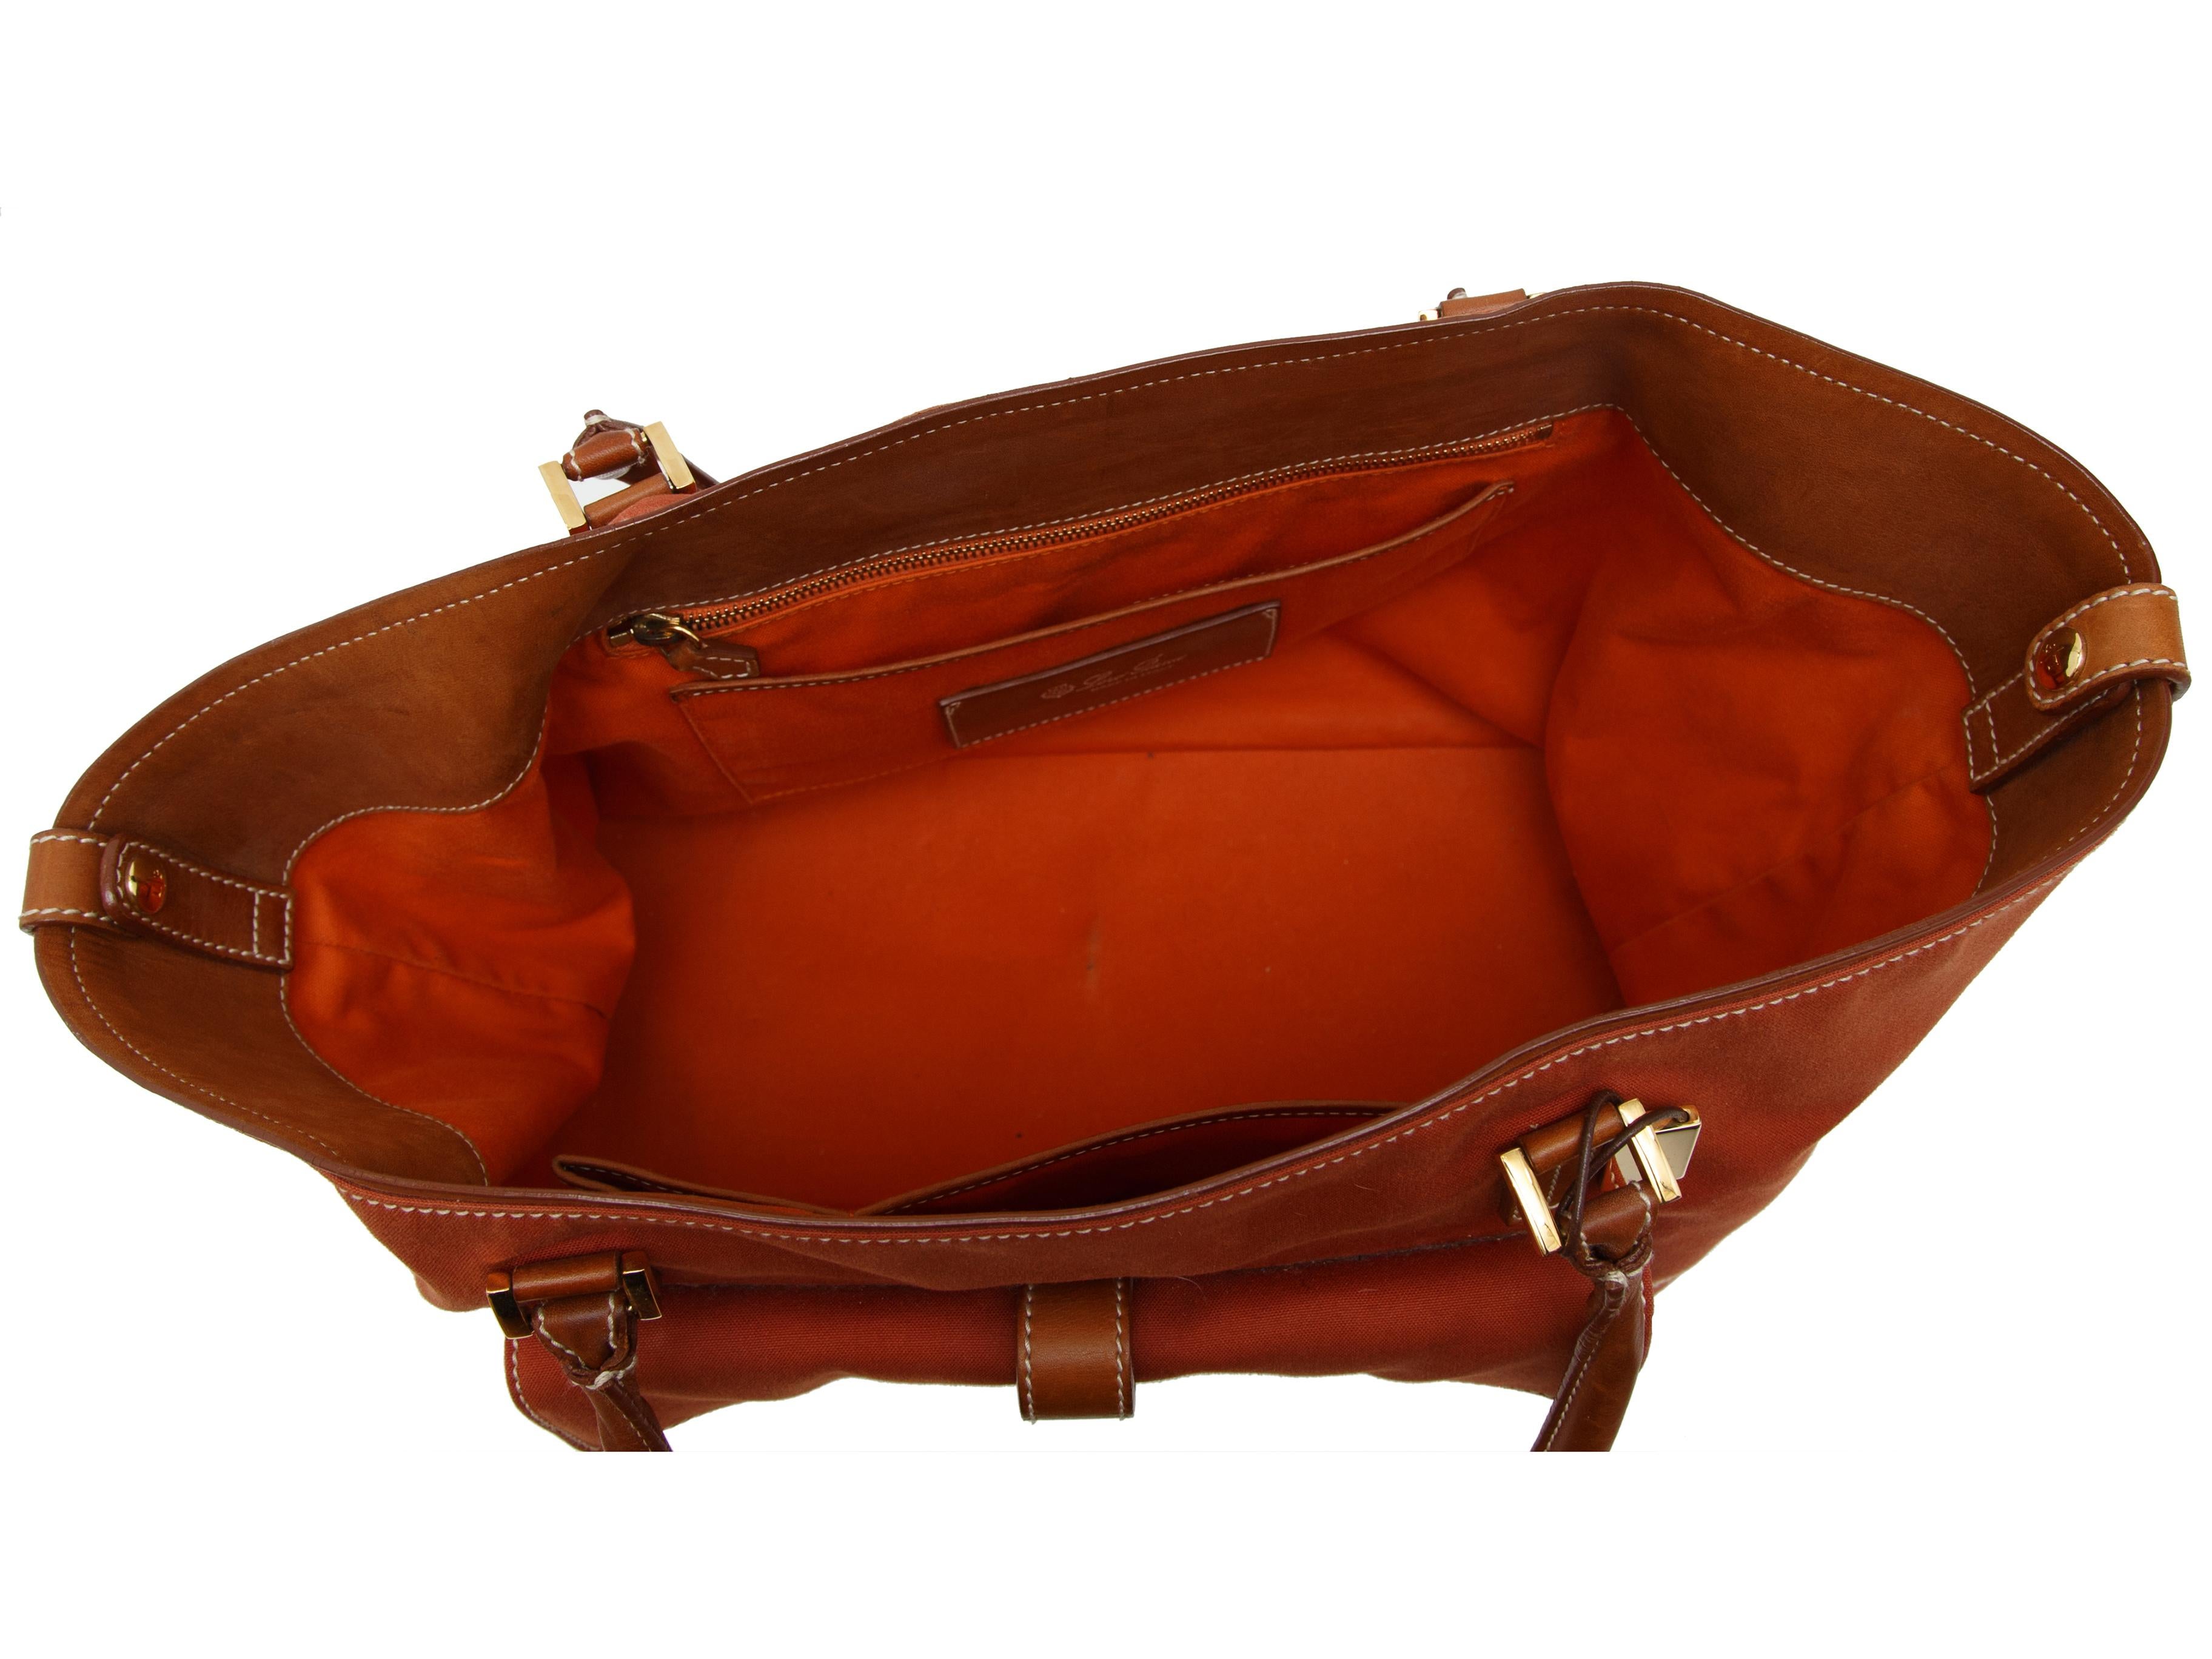 Product details: Orange leather-trimmed tote by Loro Piana. Contrast stitching throughout. Flap pocket at front. Zip pocket at back. 15